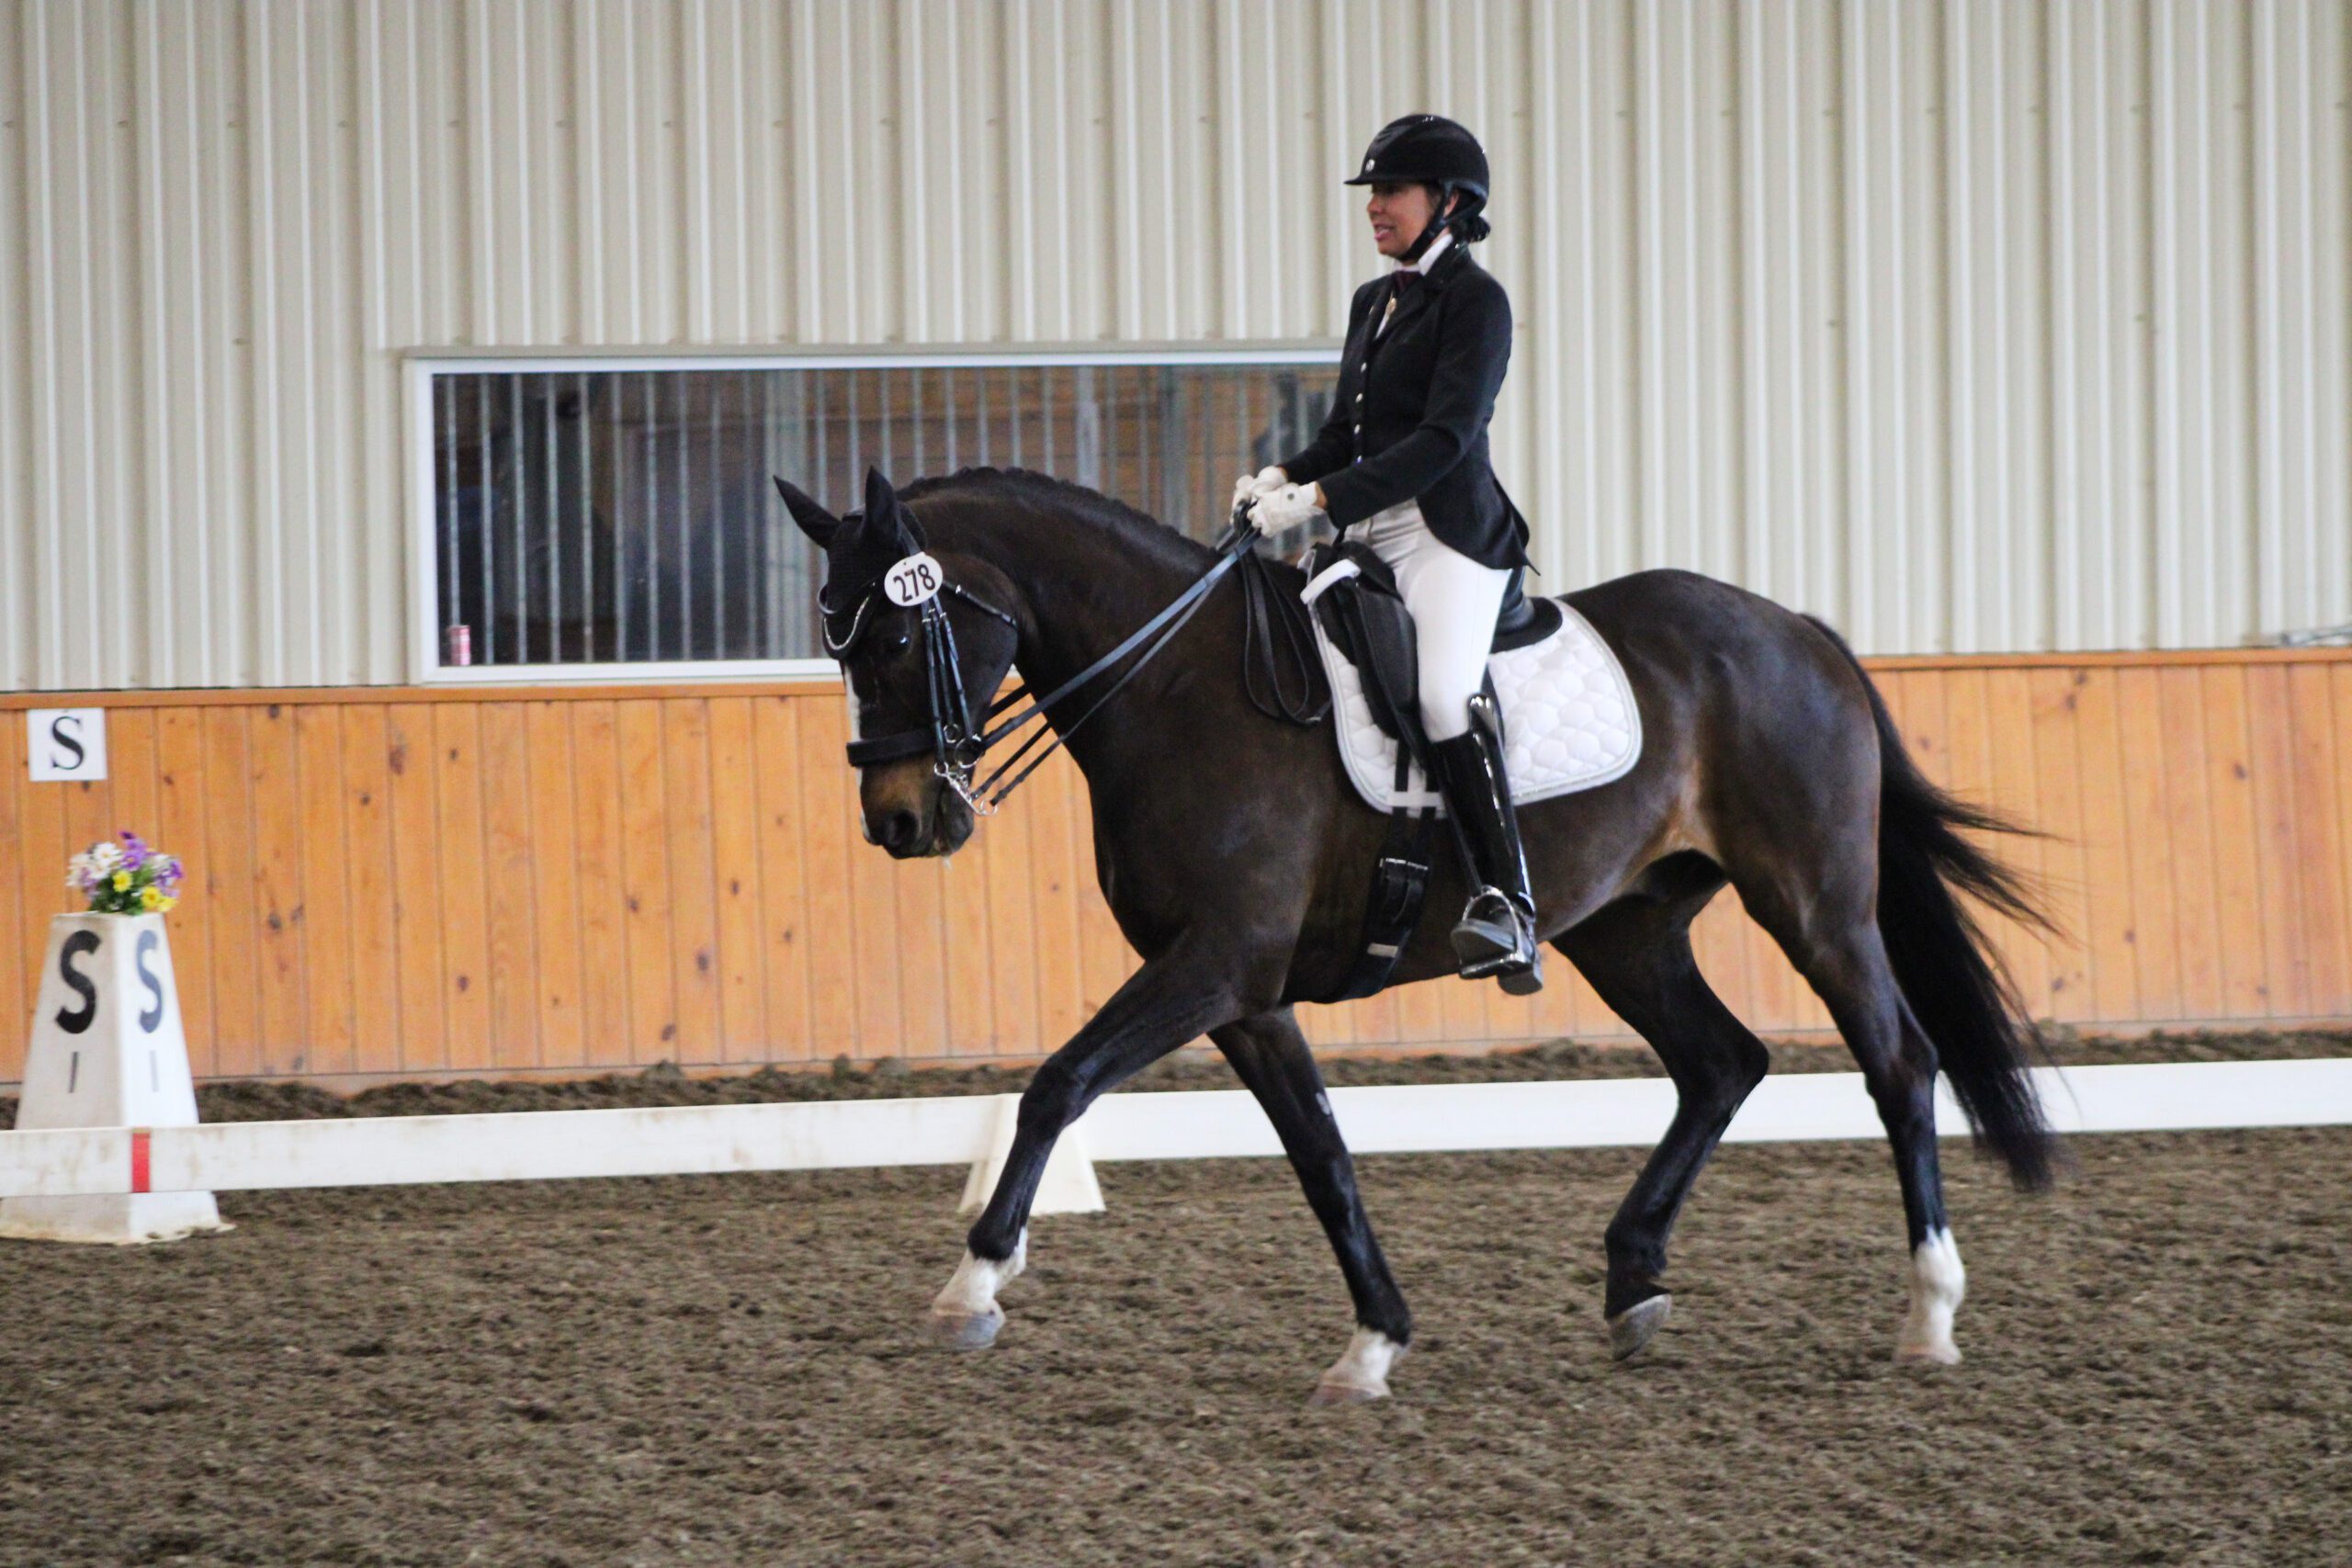 Competitor trotting horse in dressage arena during competition